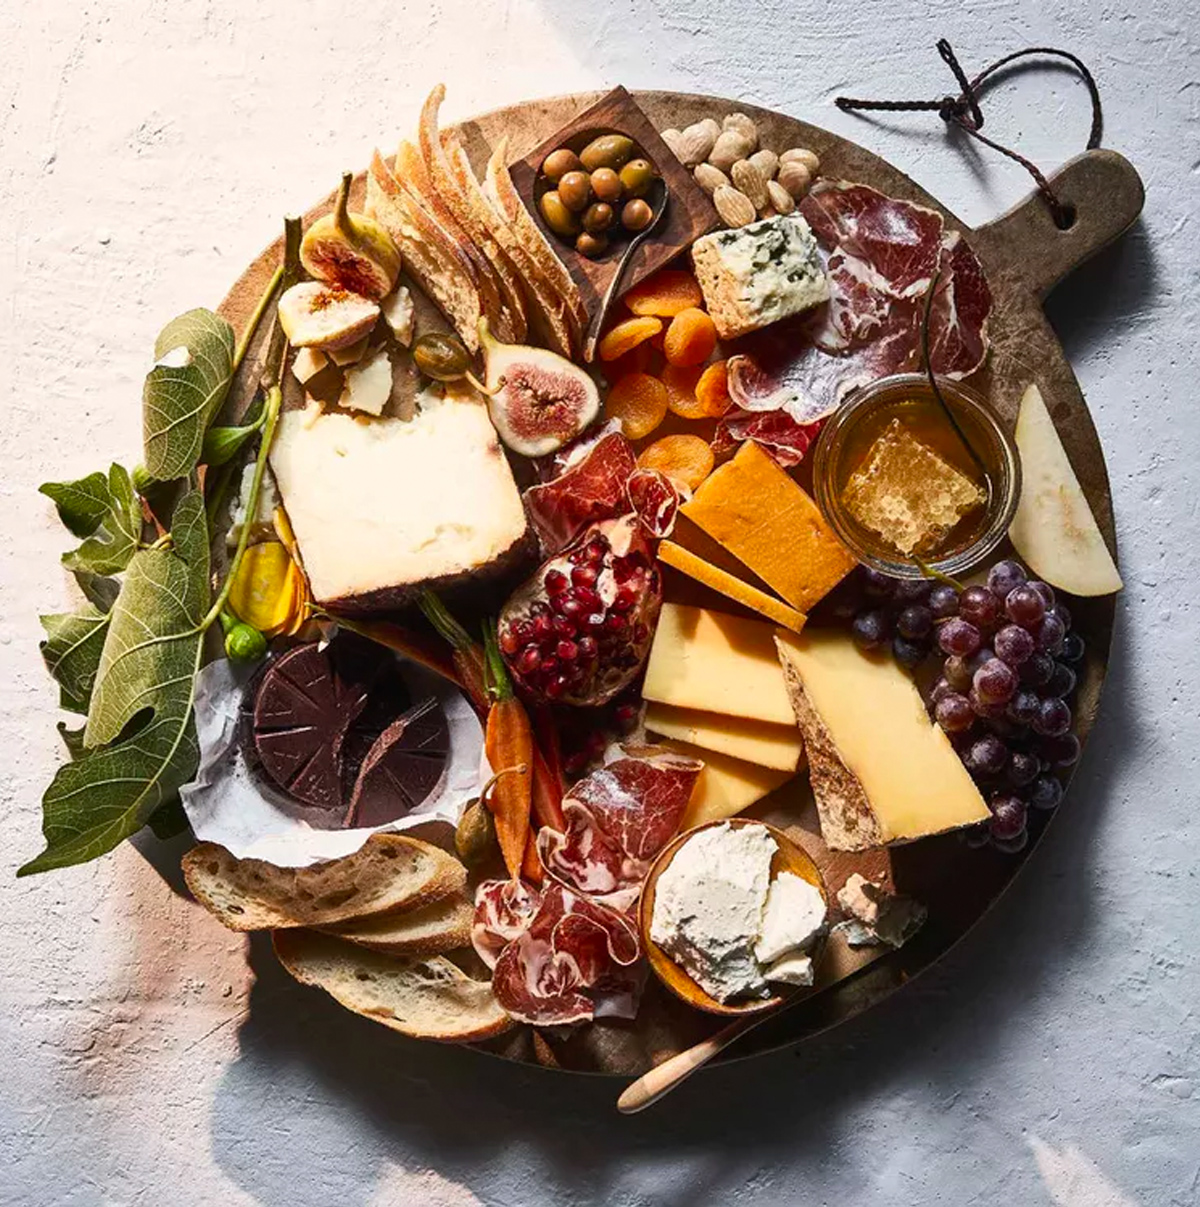 Dried fruit, figs, cheese, chocolate, meat, and nuts complete Eating Well's recipe's winter charcuterie board.